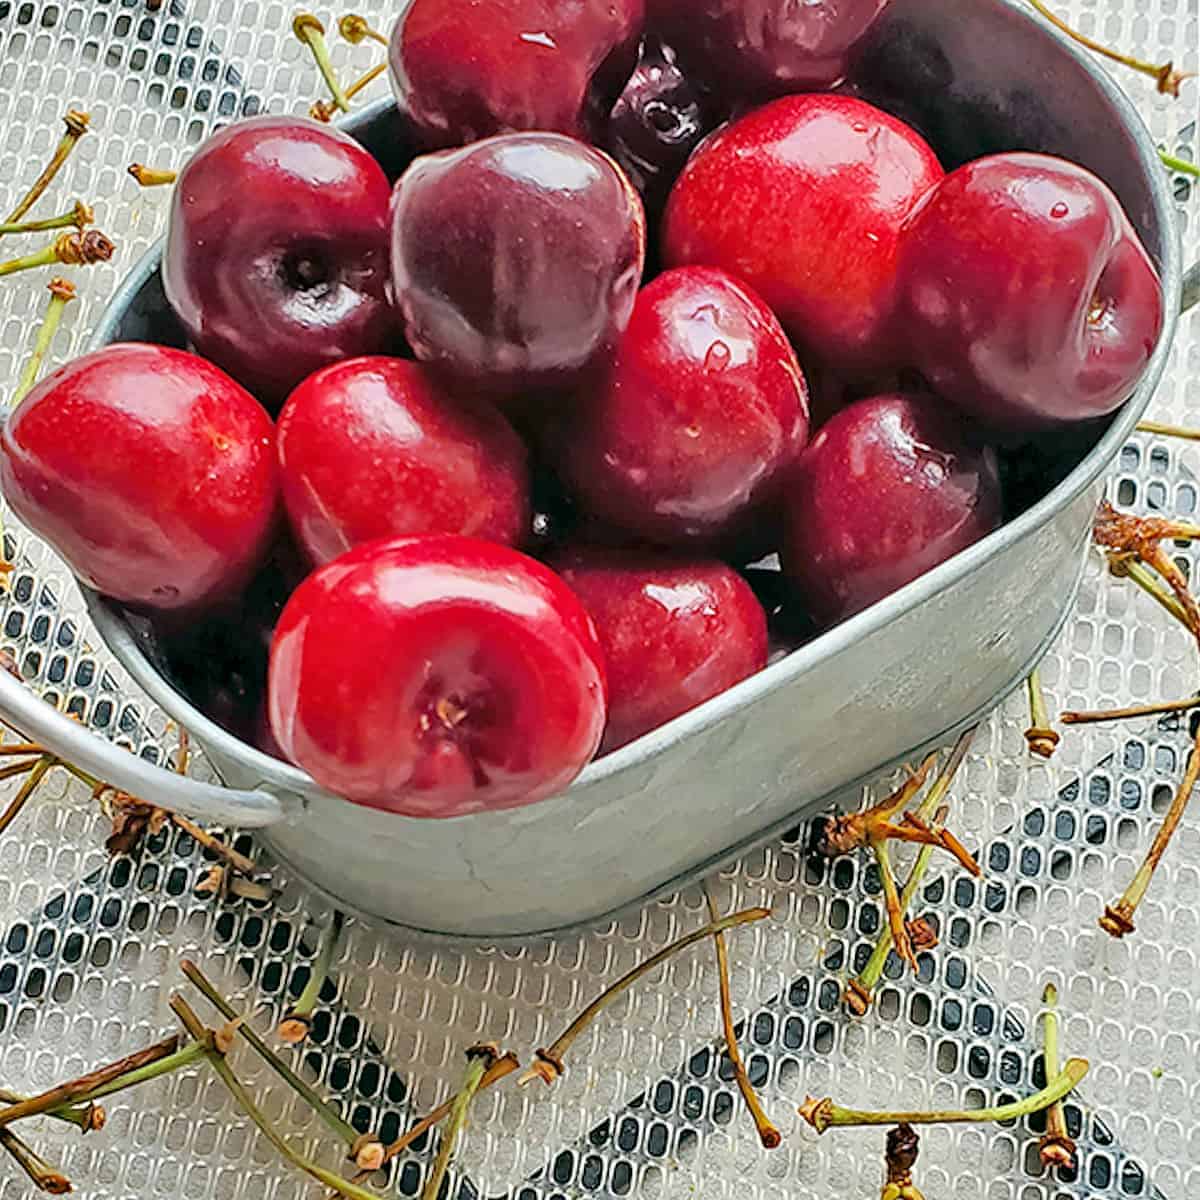 Cherry Substitutes: How to Add Cherry Flavour Without Fresh